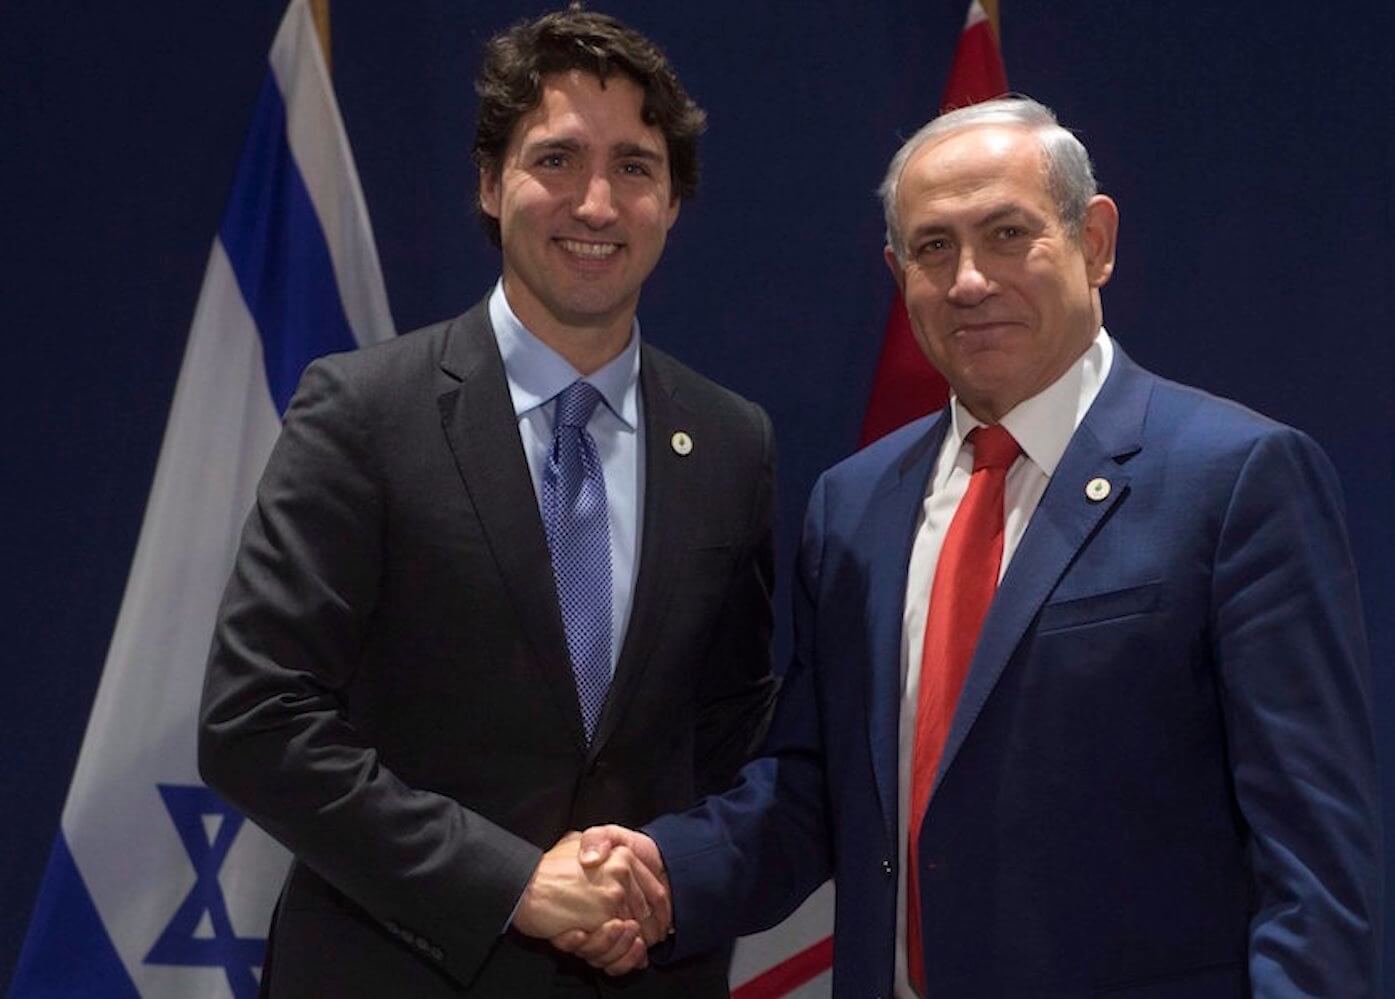 Israeli Prime Minister Benjamin Netanyahu shakes hands with Canadian Prime Minister Justin Trudeau (Photo: Adrian Wyld/Canadian Press)